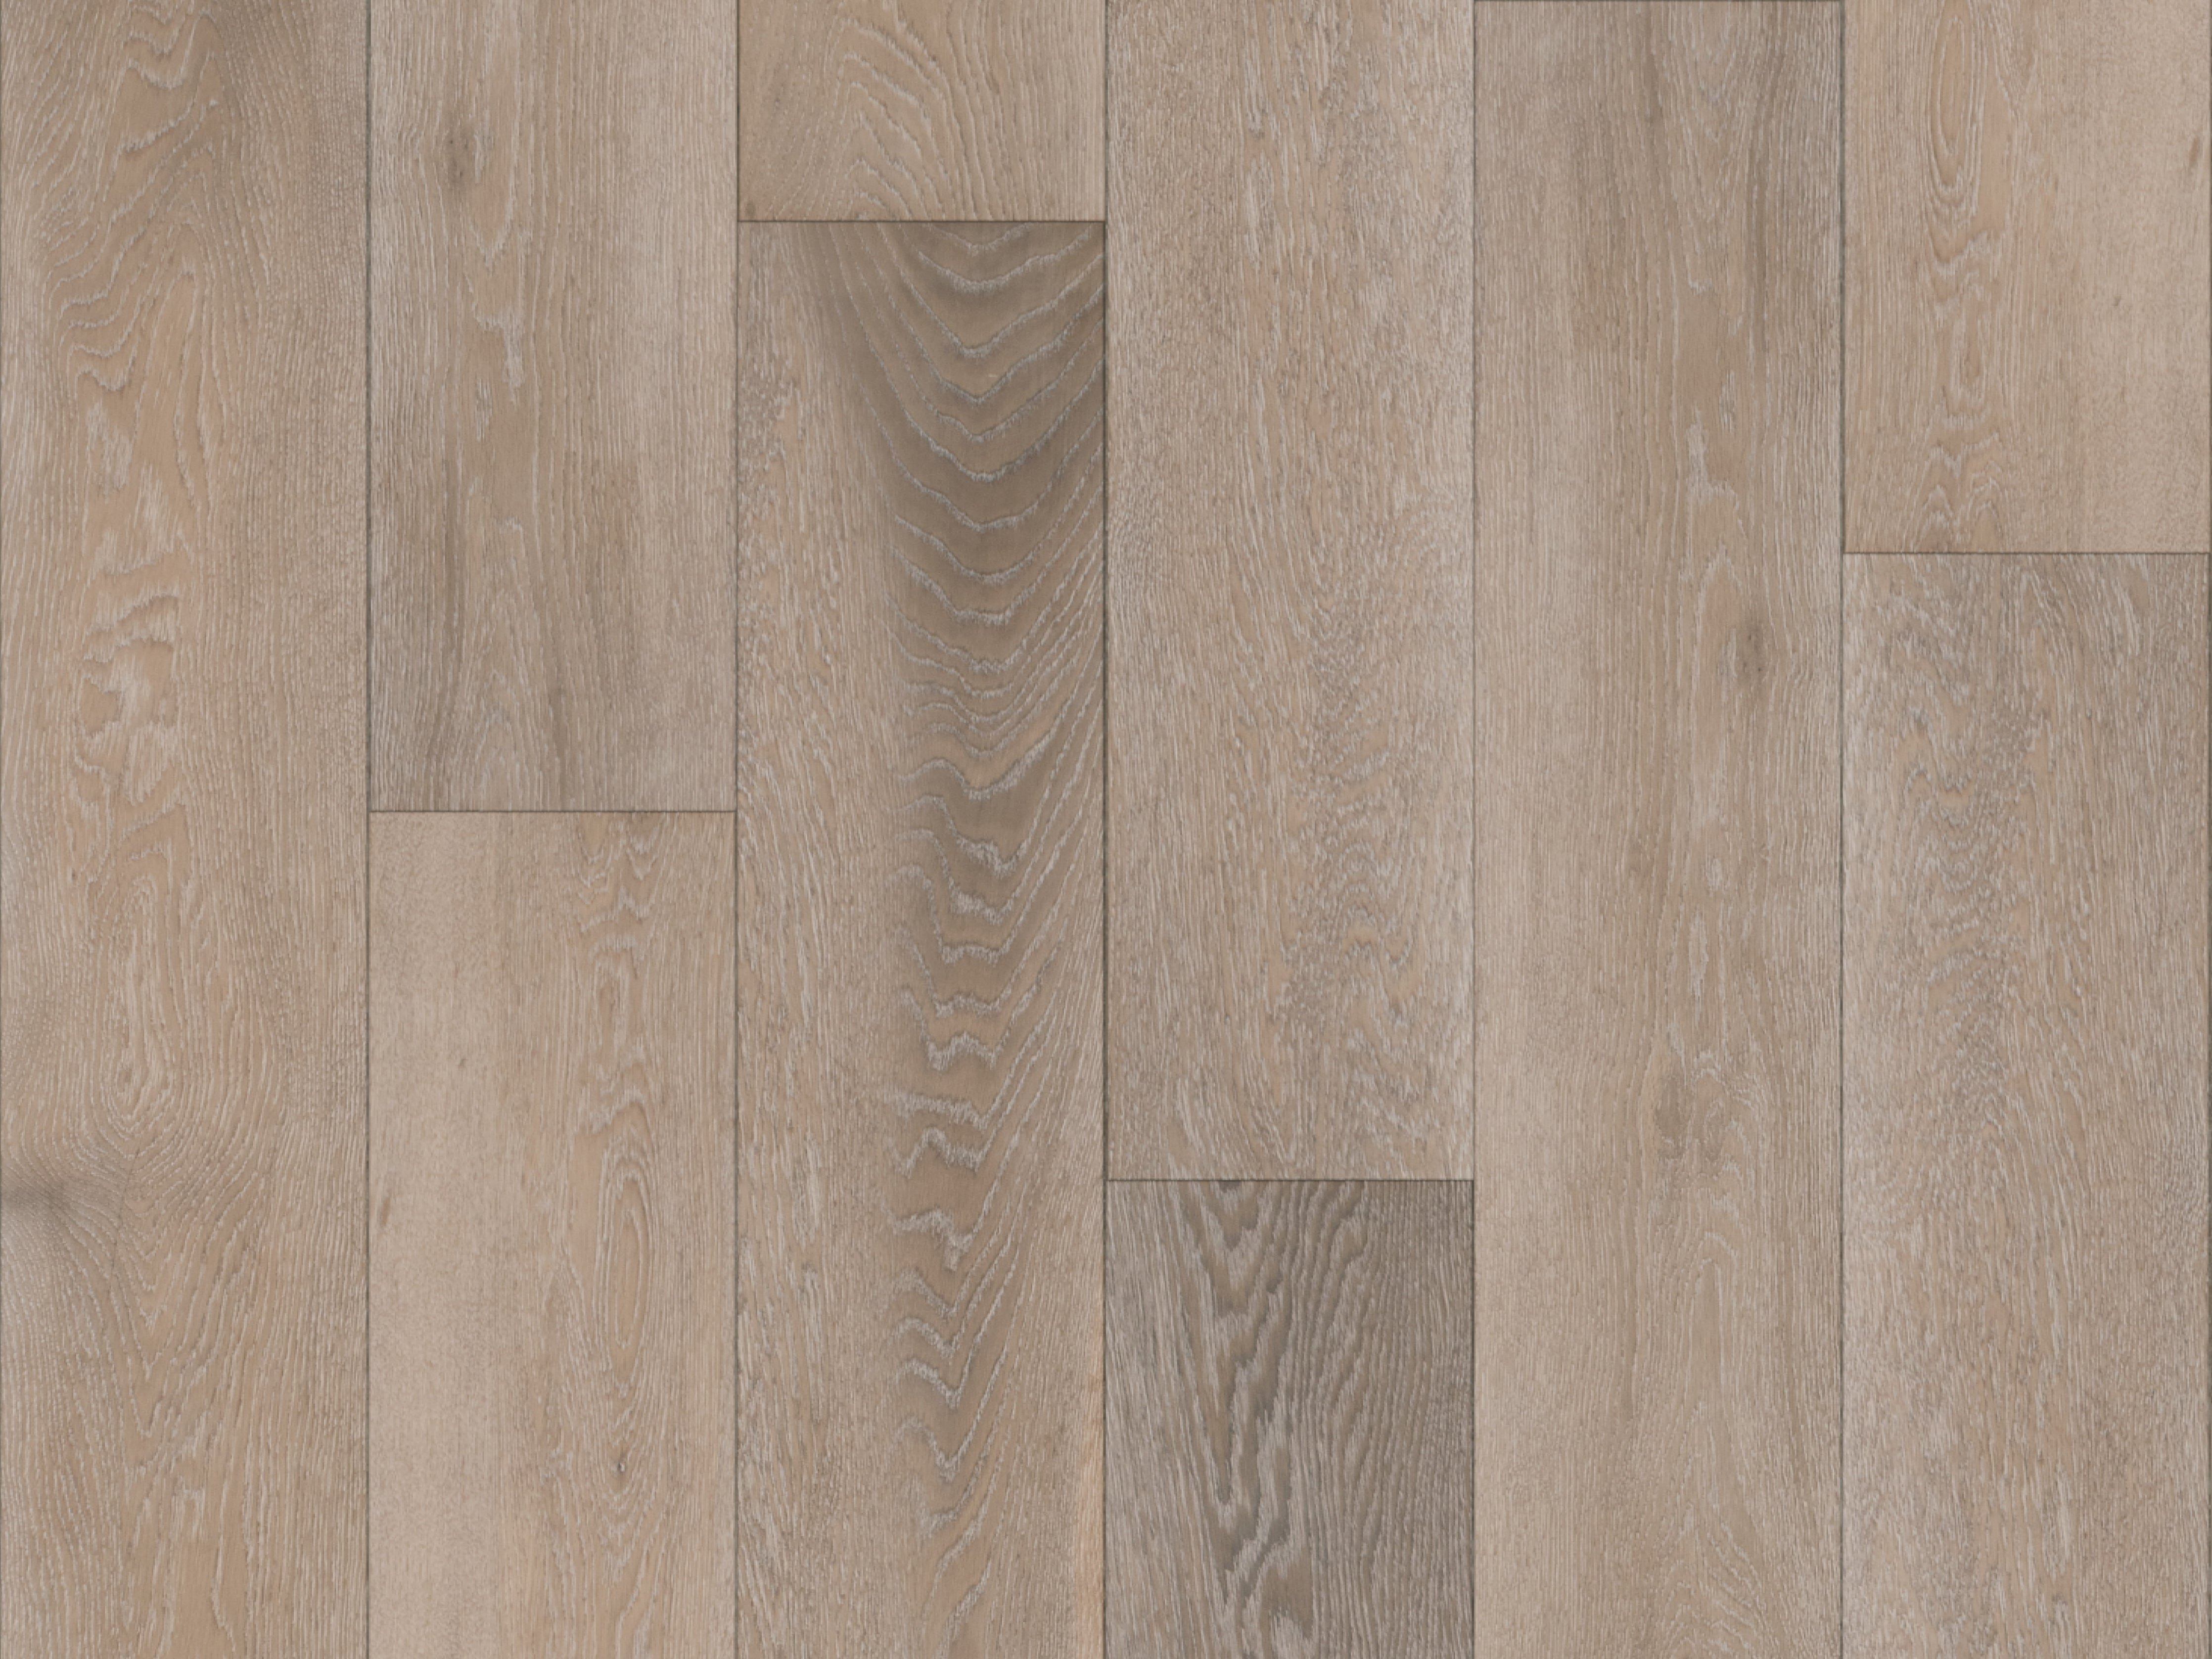 duchateau signature vernal lugano european oak engineered hardnatural wood floor uv oil finish for interior use distributed by surface group international